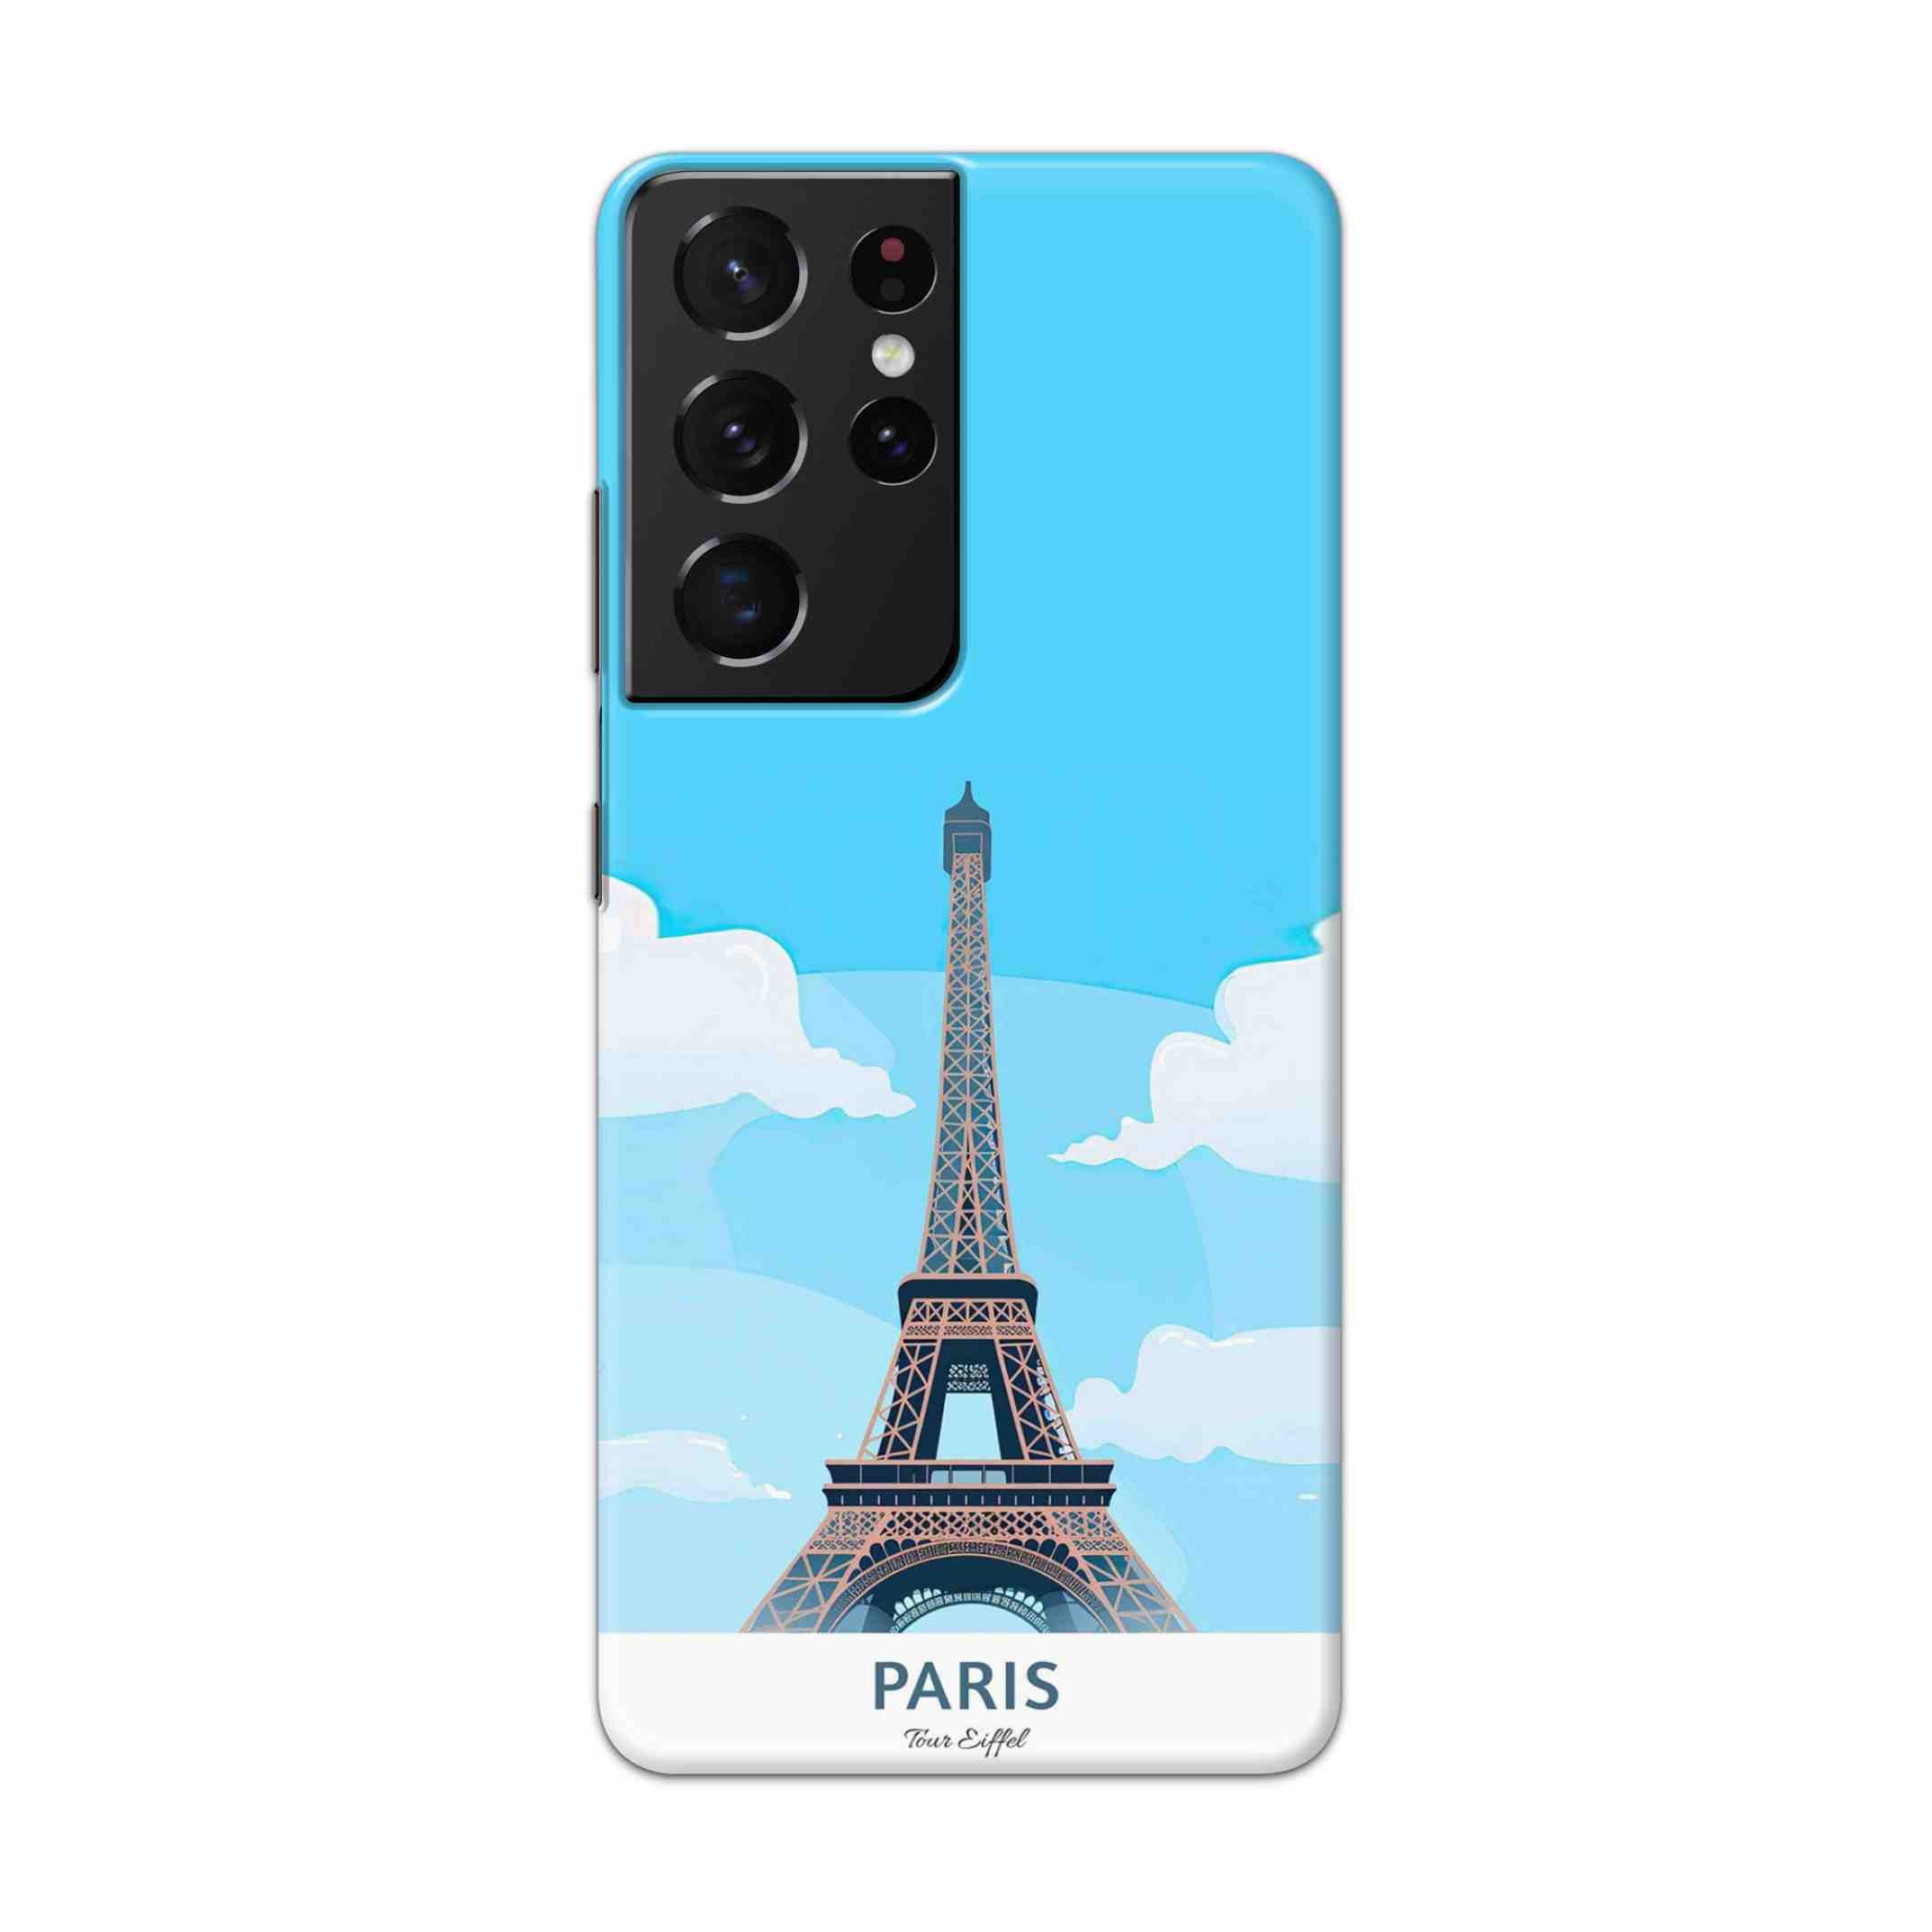 Buy Paris Hard Back Mobile Phone Case Cover For Samsung Galaxy S21 Ultra Online